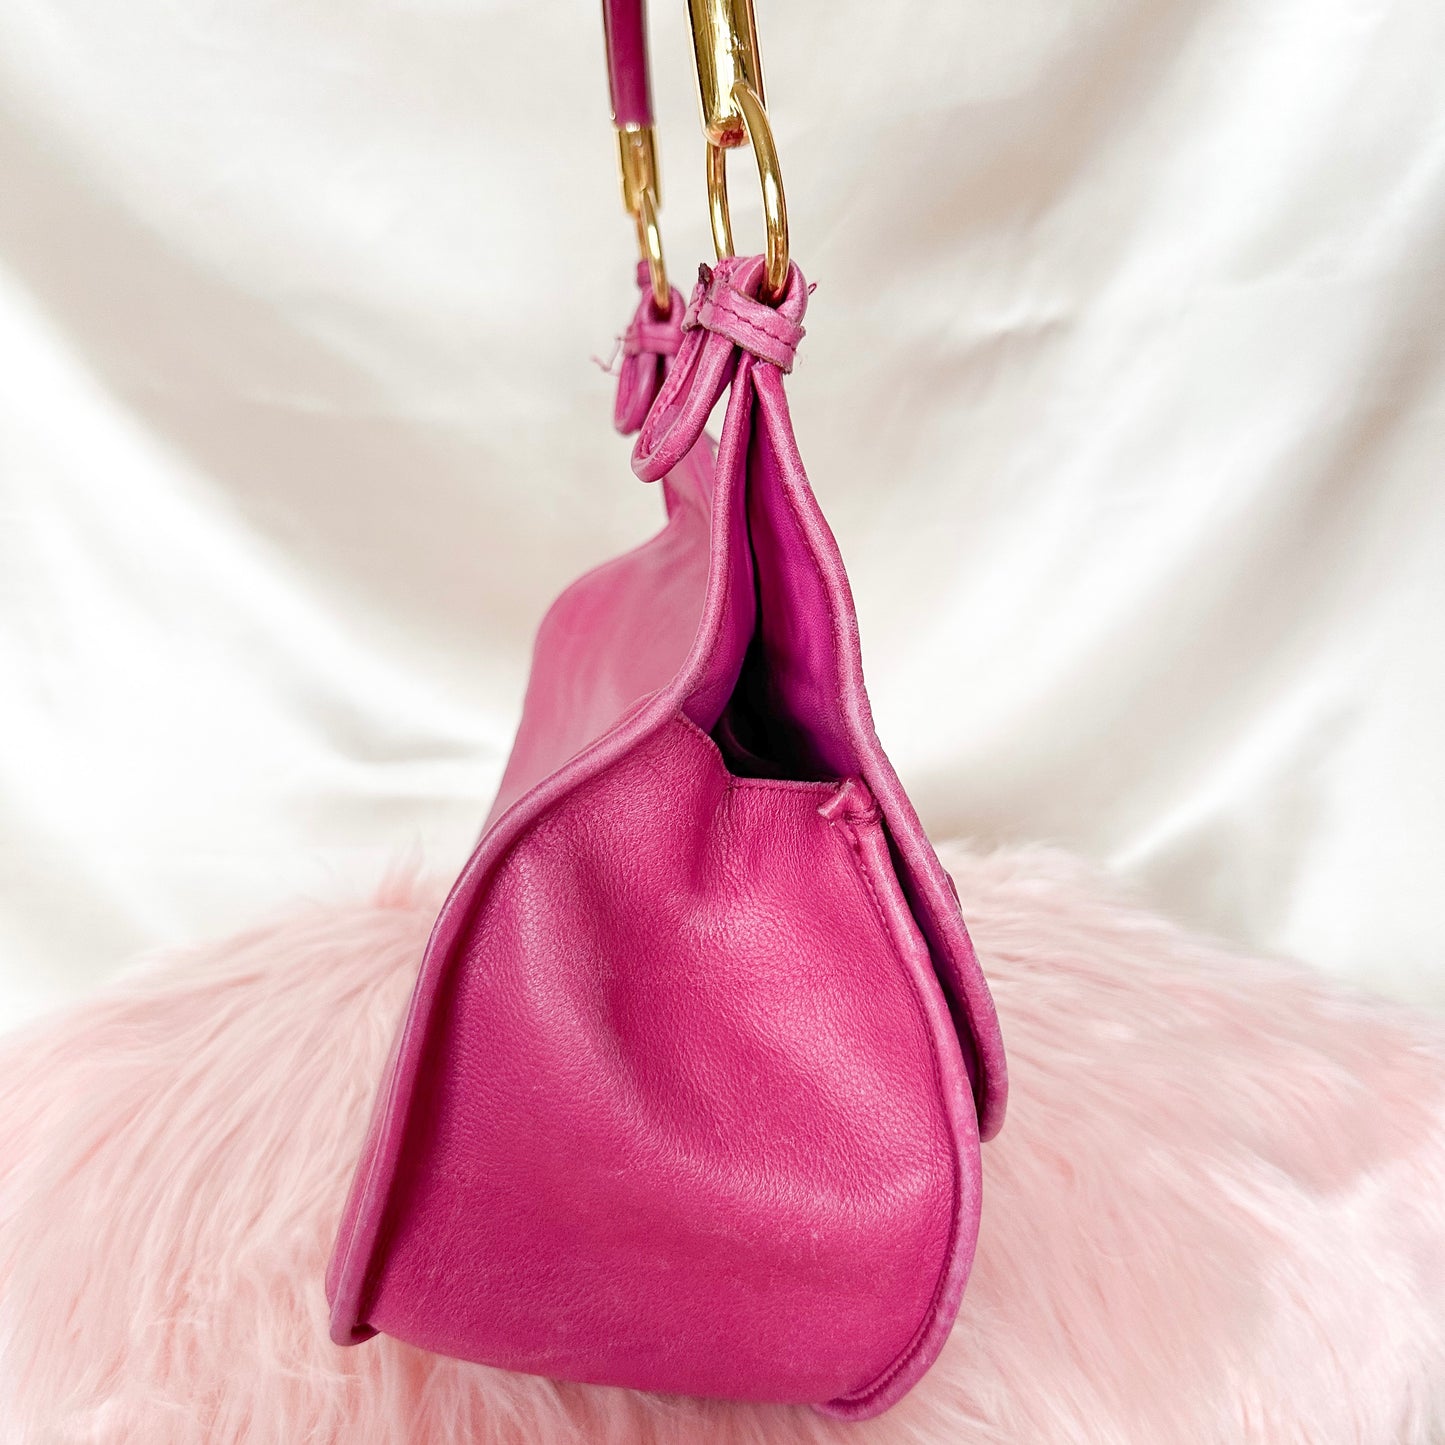 Dior Pink Leather Bejeweled Hobo